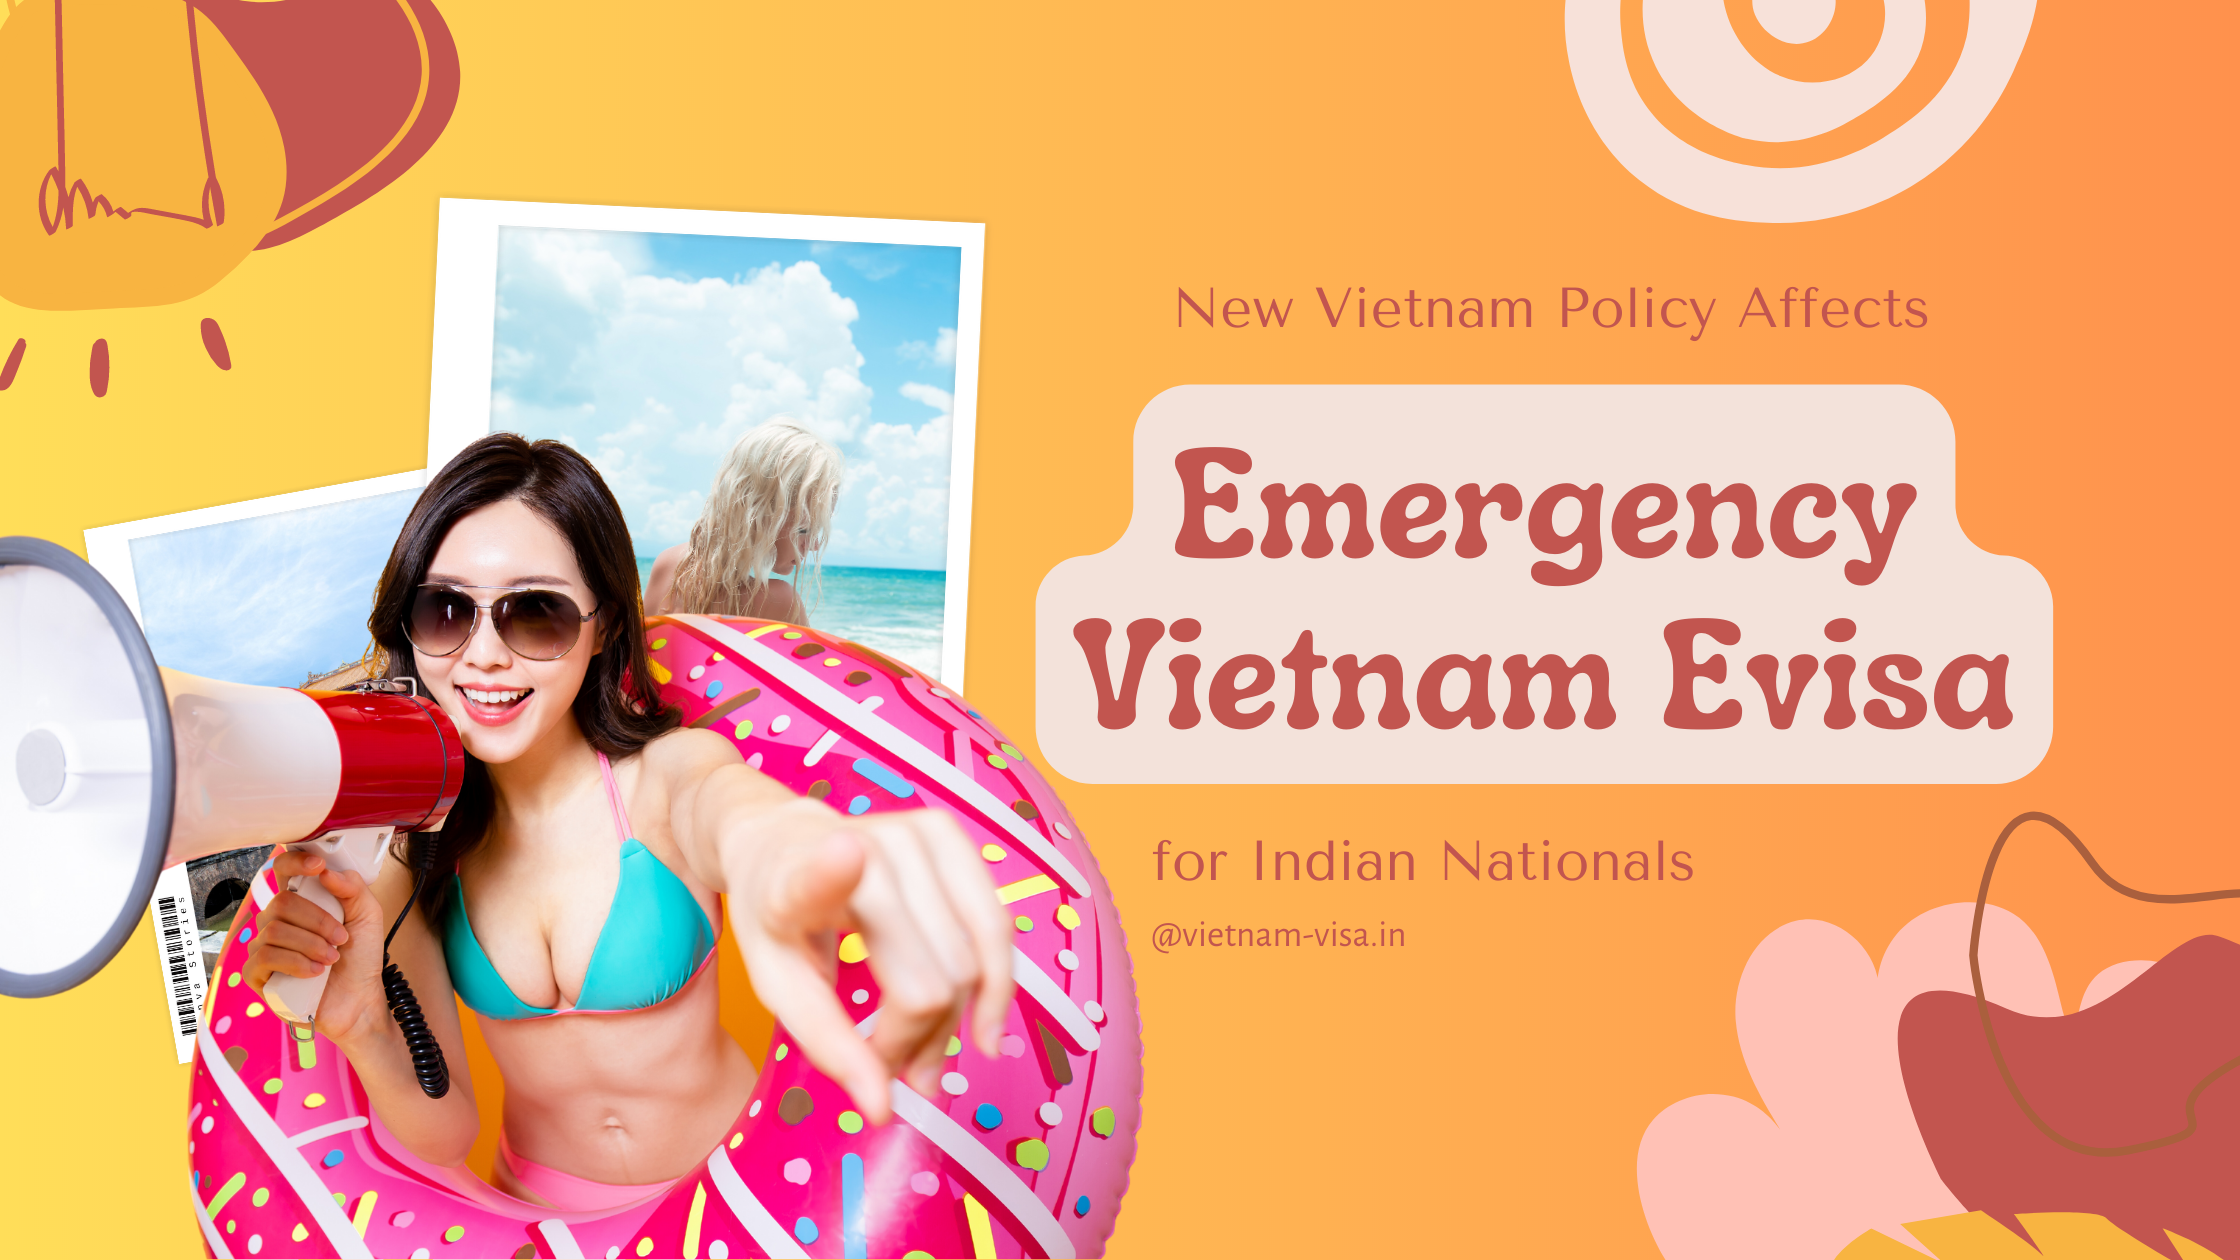 New-Vietnam-Evisa-Policy-Affects-the-Emergency-Vietnam-Evisa-Services-for-Indian-nationals-2023-2024